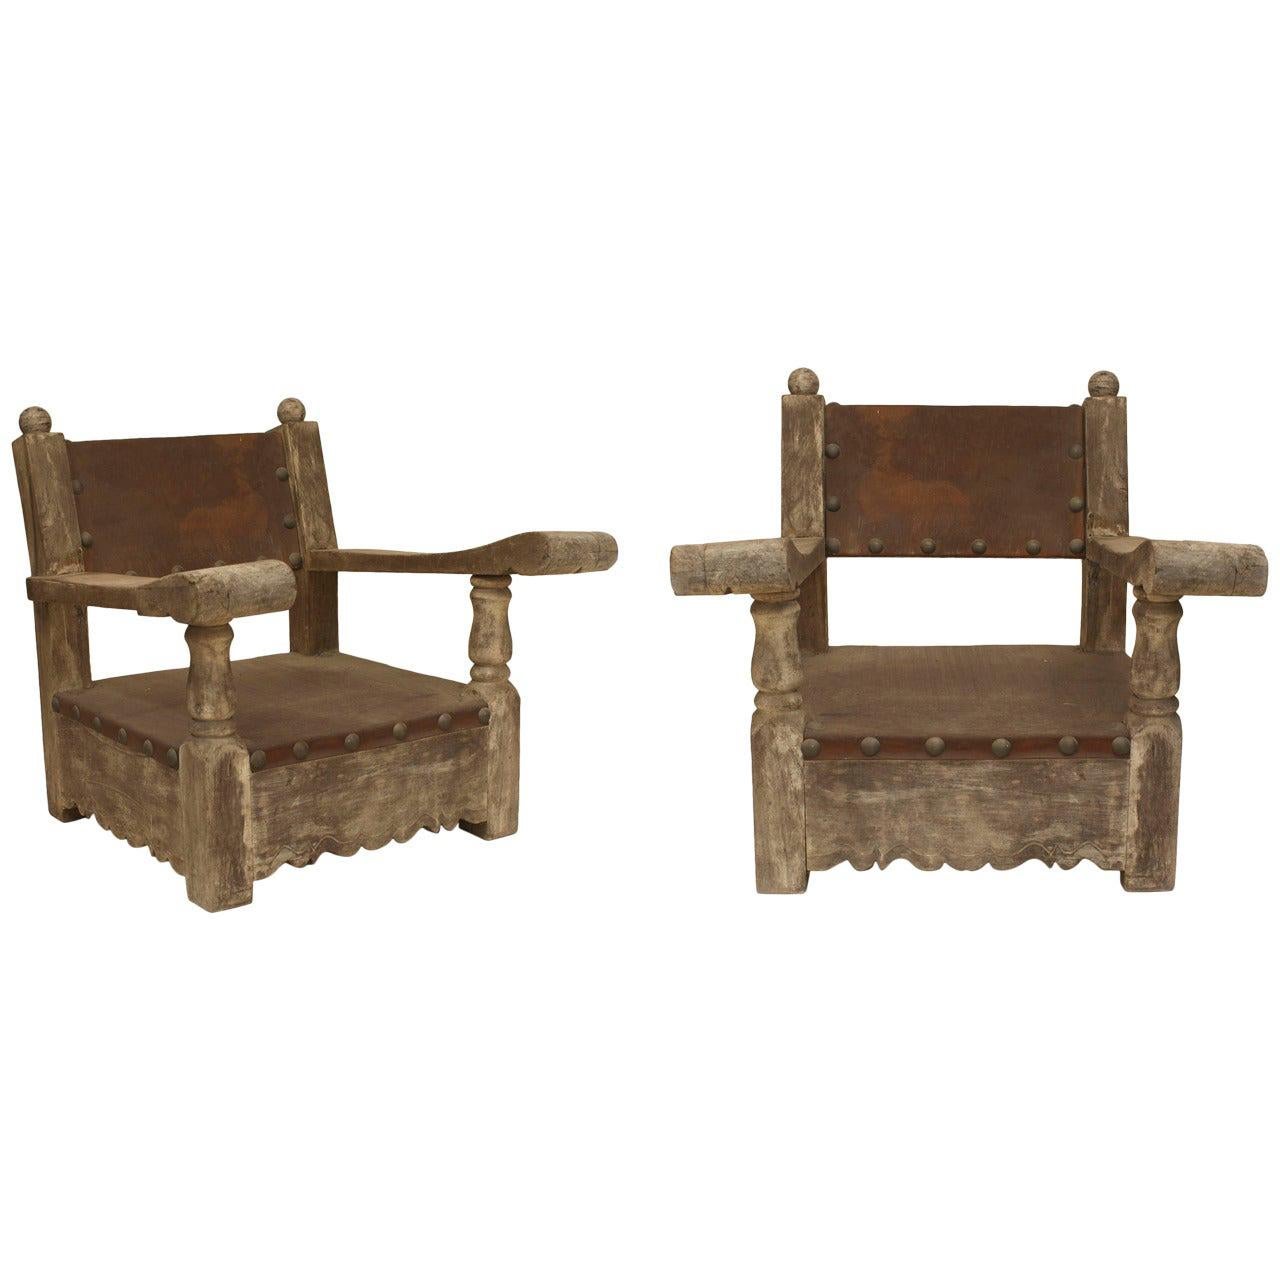 Pair of Rustic Country Weathered Armchairs